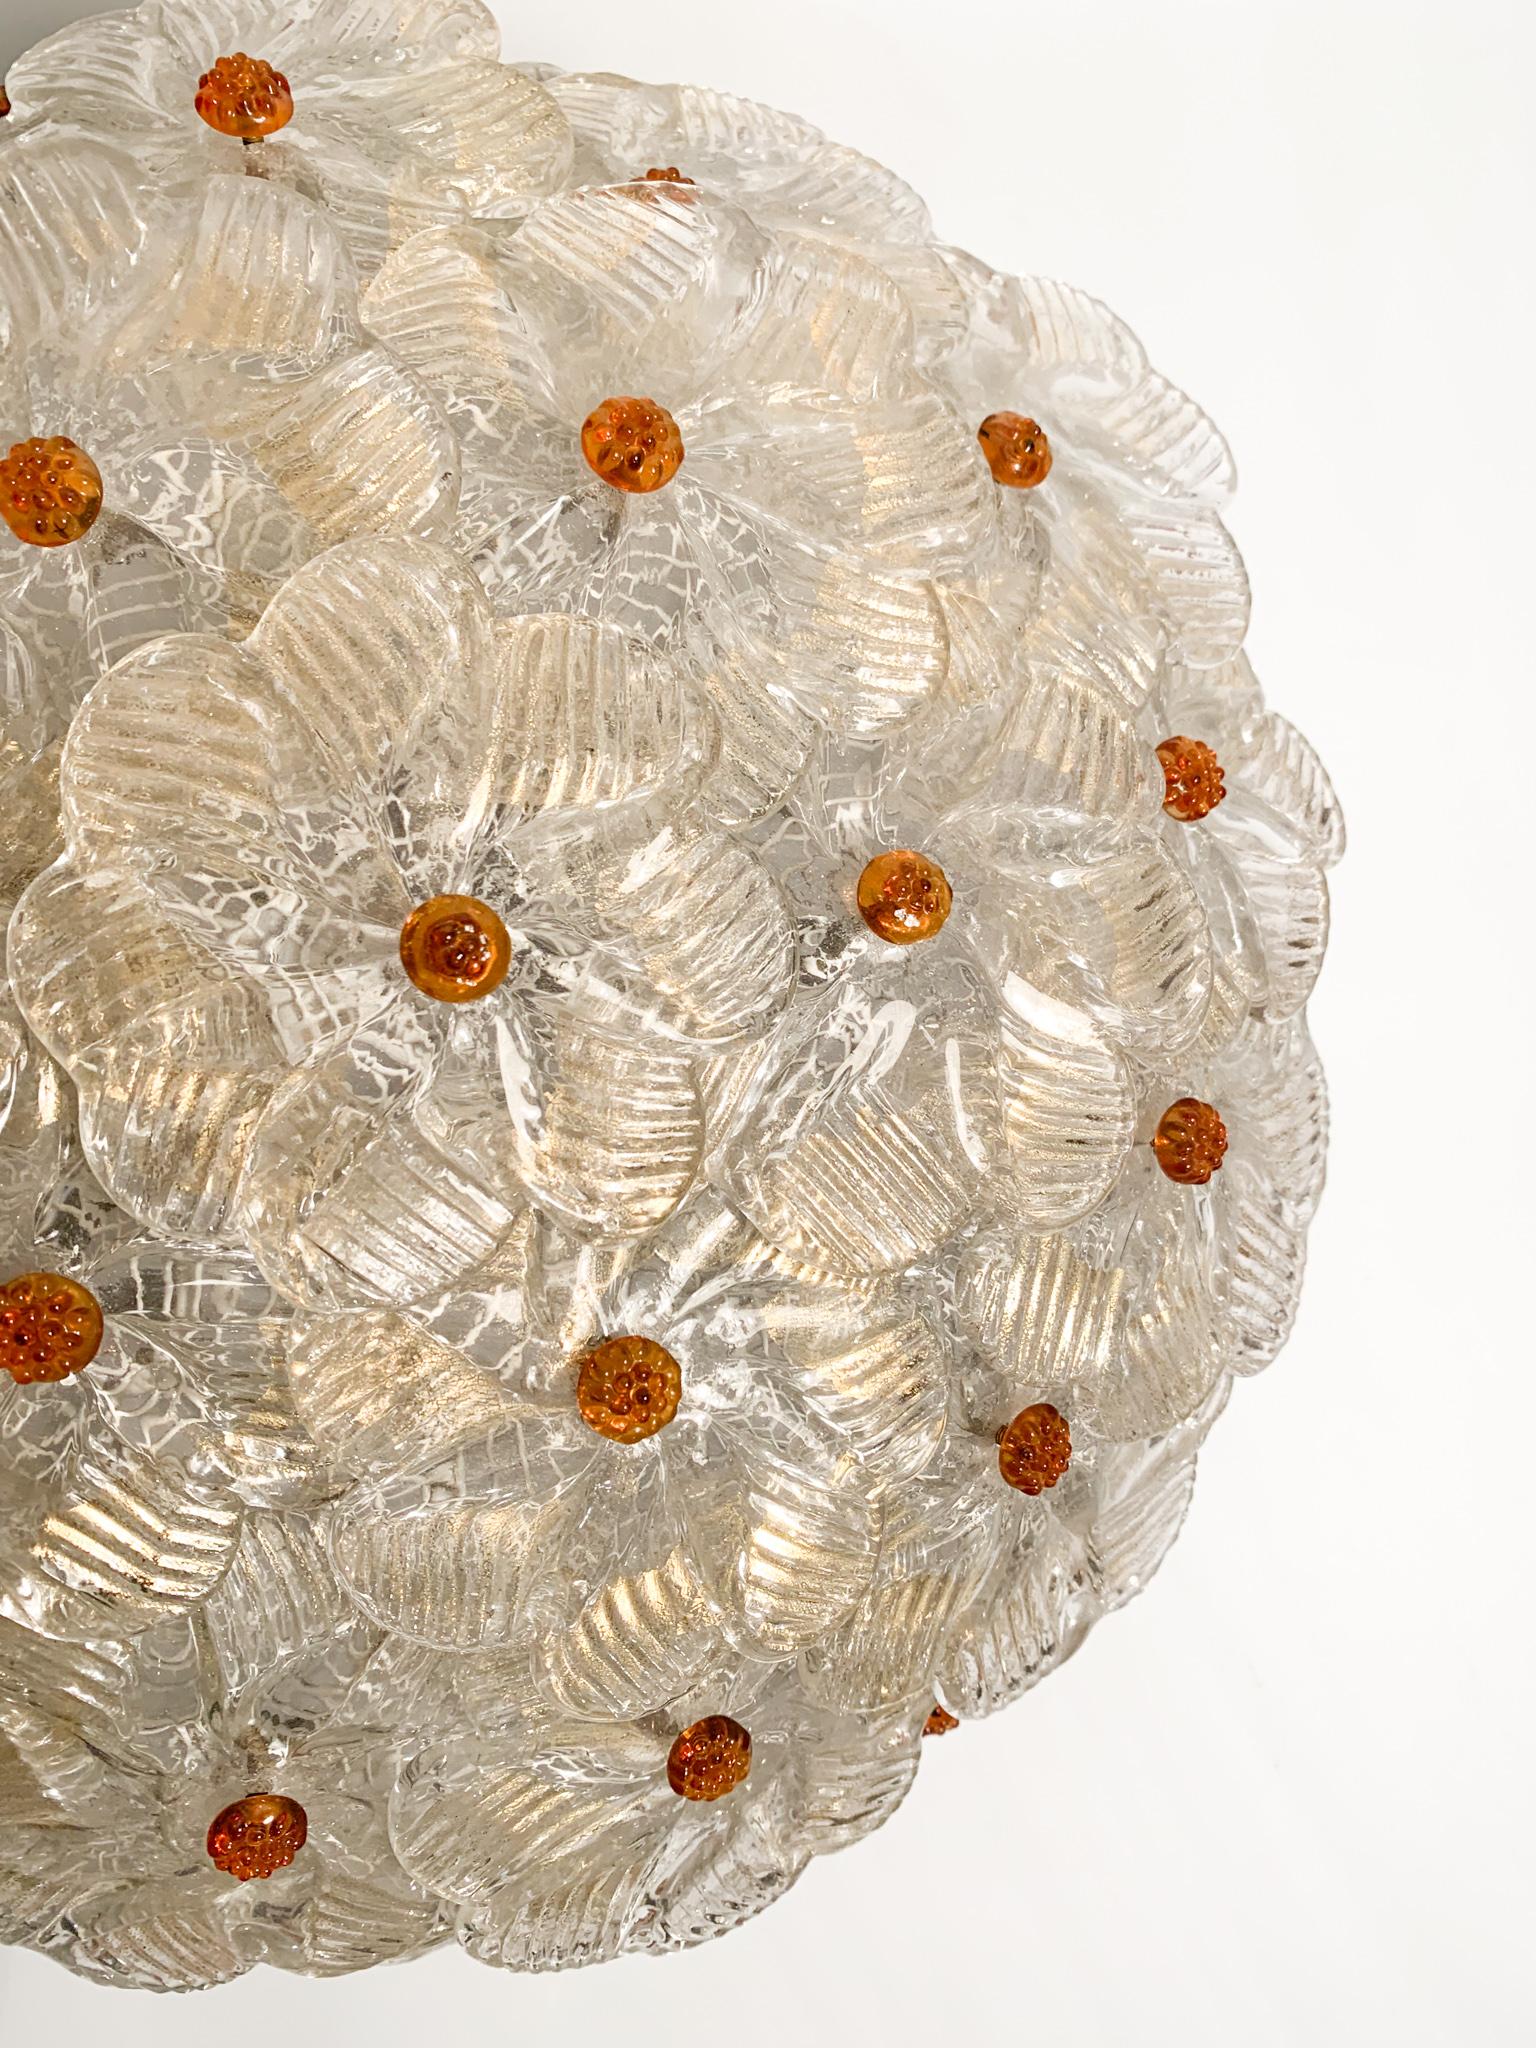 Mid-20th Century Millefiori Ceiling Light by Barovier & Toso in Murano Glass from the 1950s